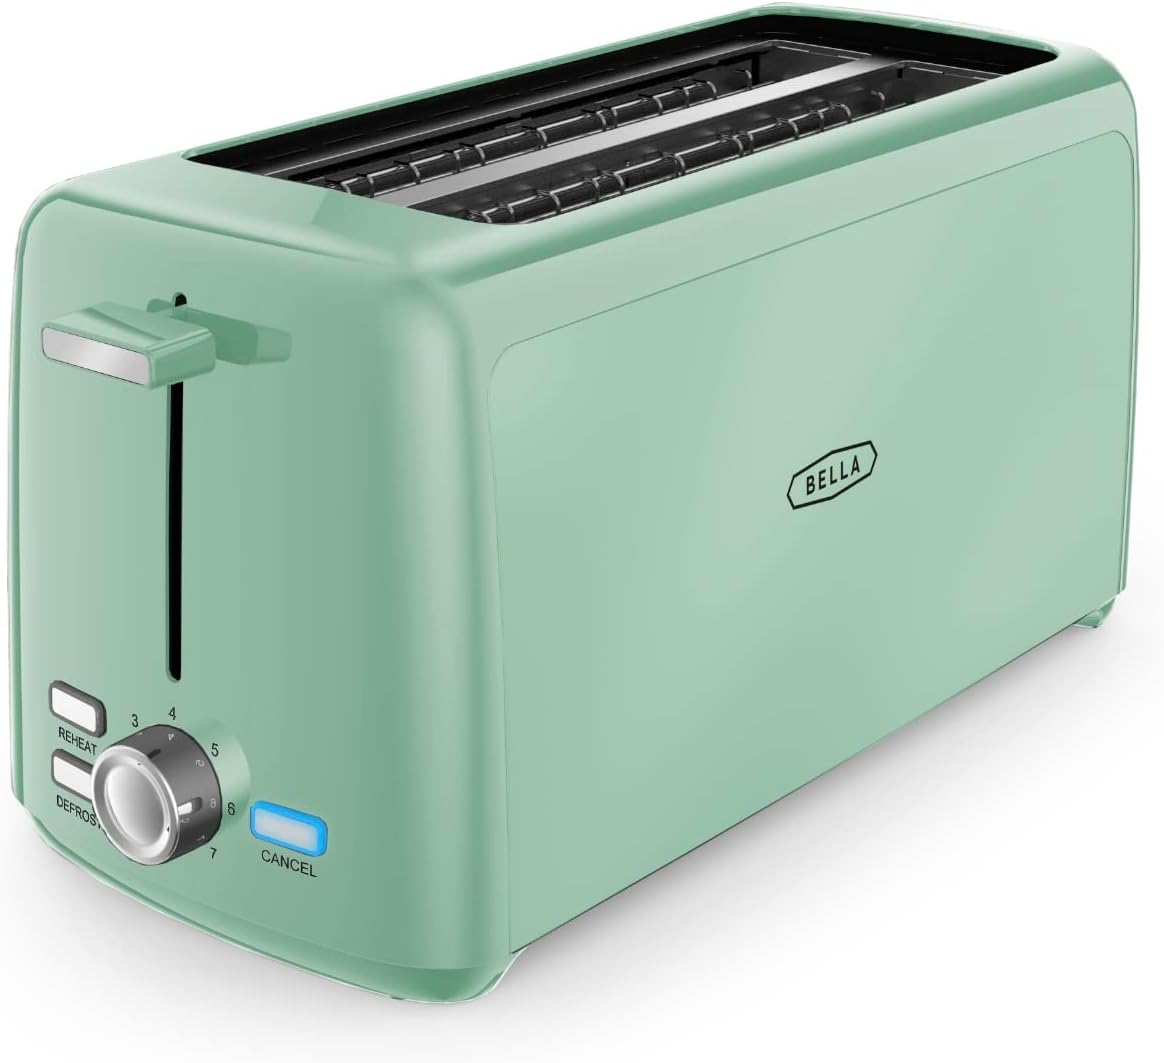 BELLA 4 Slice Toaster, Long Slot & Removable Crumb Tray, 7 Shading Options with Auto Shut Off, Cancel & Reheat Button, Toast Bread & Bagel, Sage